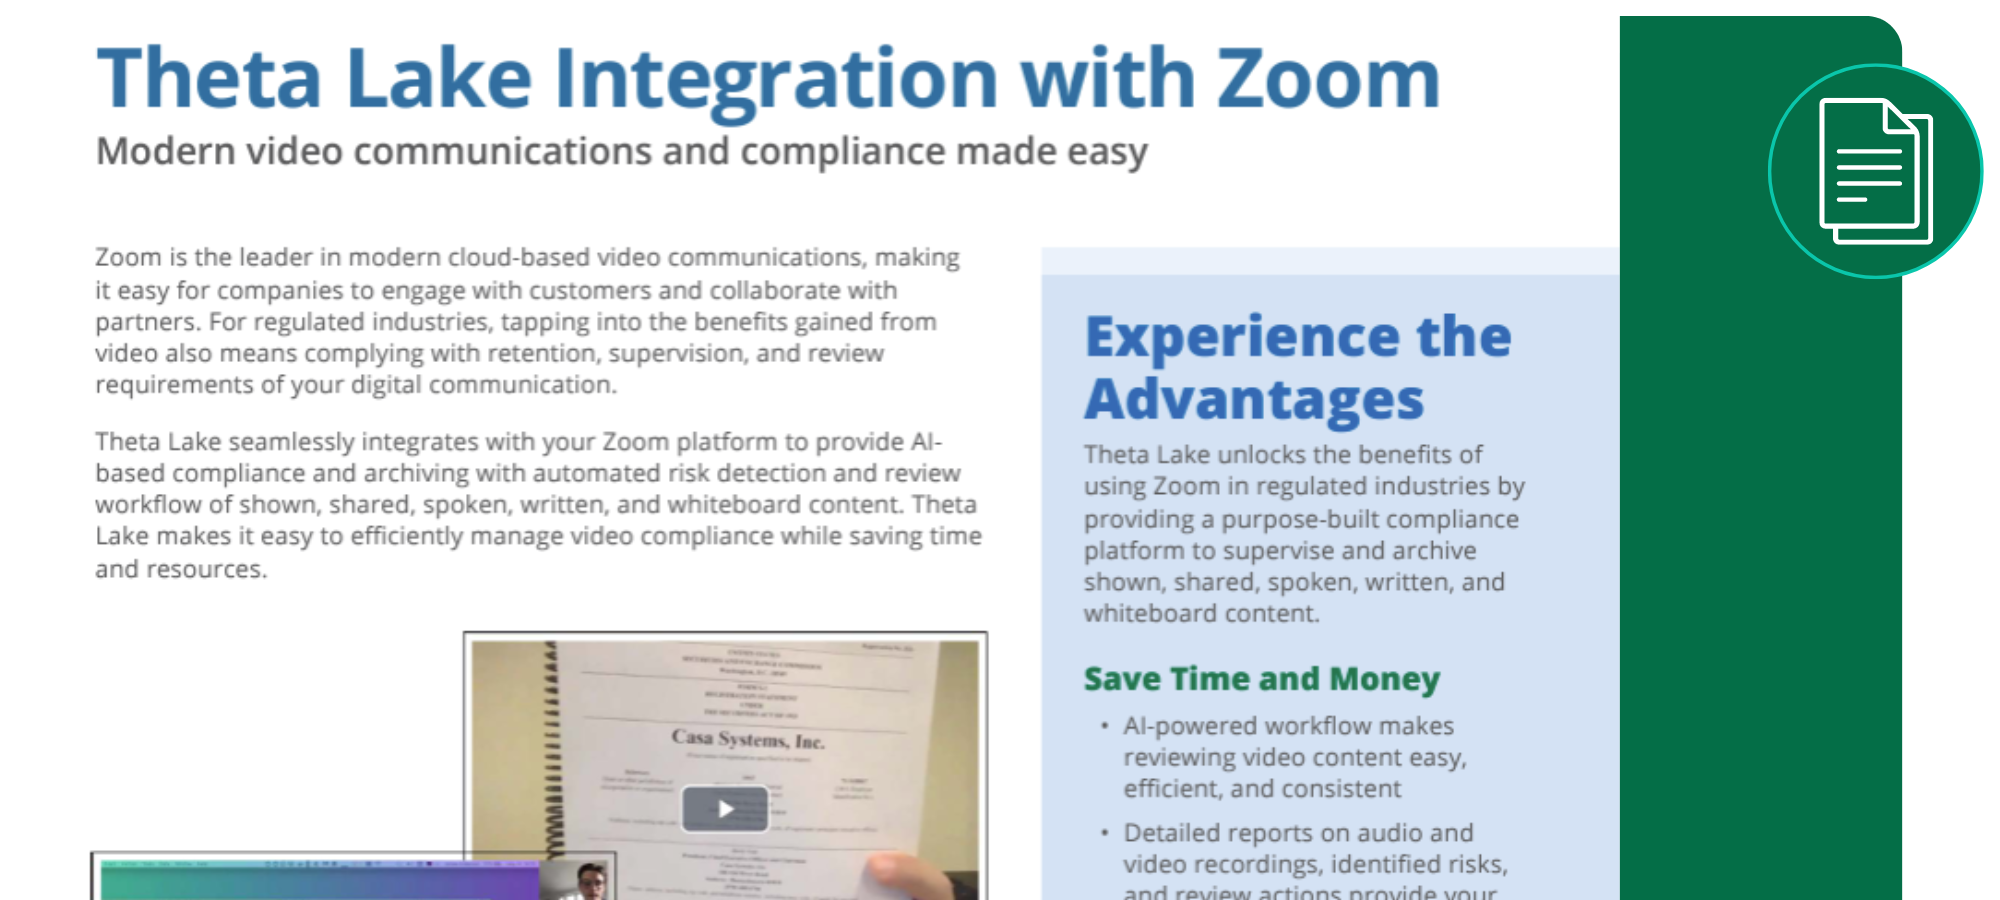 IntegrationBrief ThetaLake and Zoom 2023